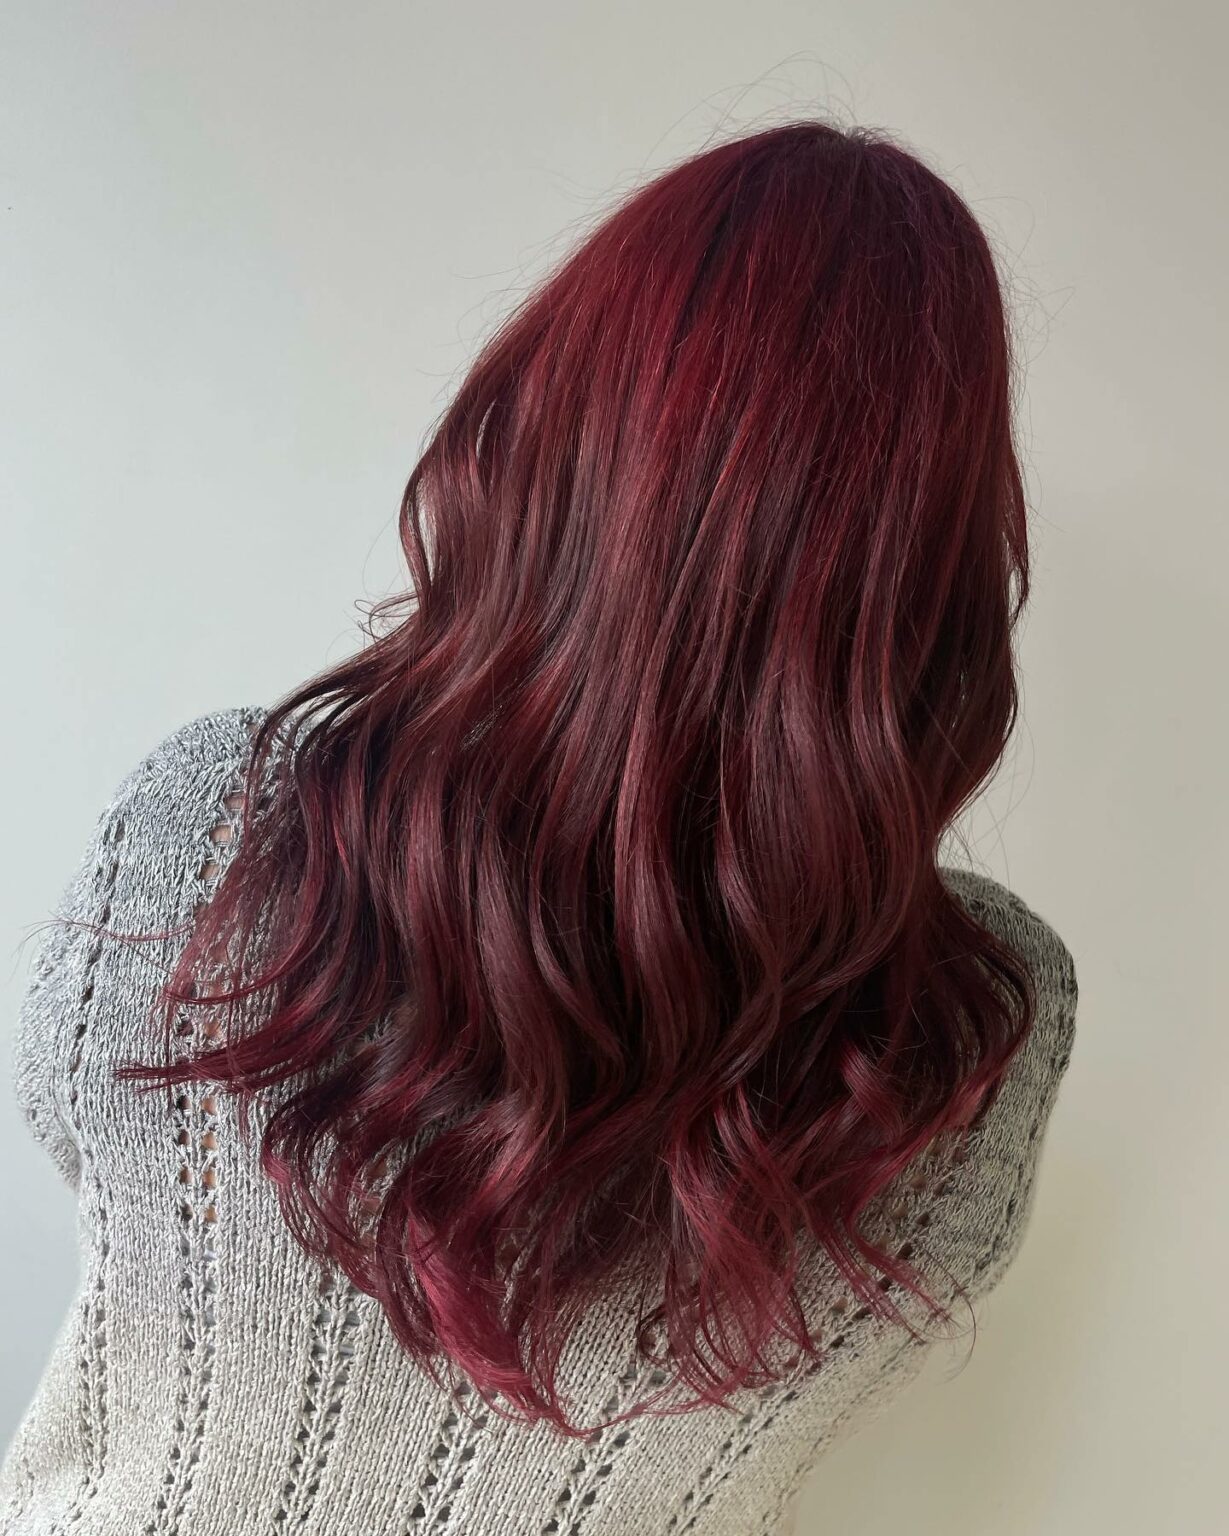 Burgundy Wine Hair Color: Turn Heads With These 40+ Gorgeous Shades